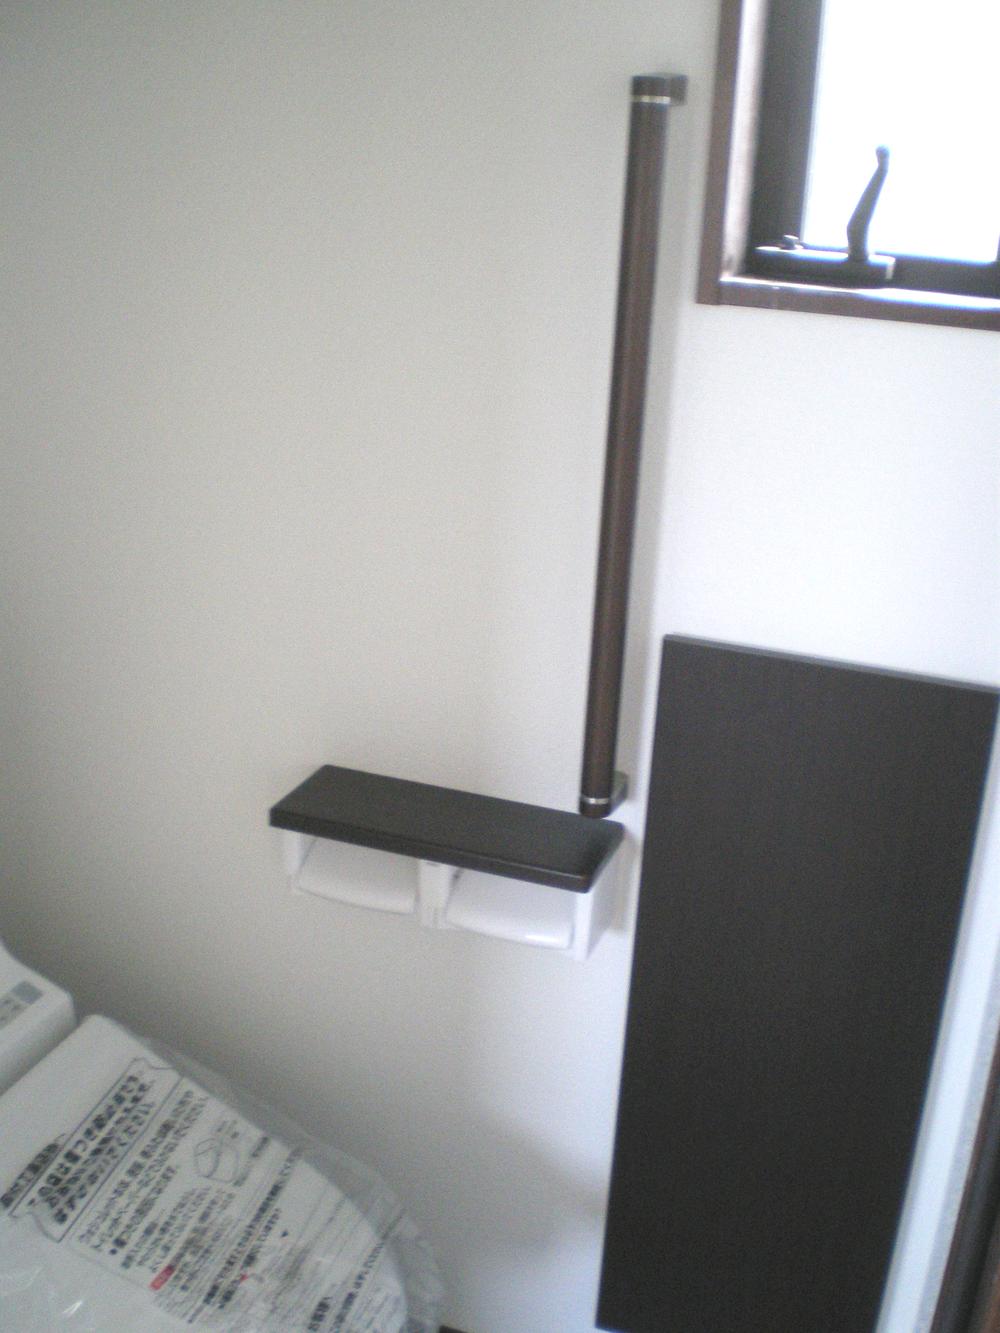 Same specifications photos (Other introspection). Firm is with storage in toilet. 